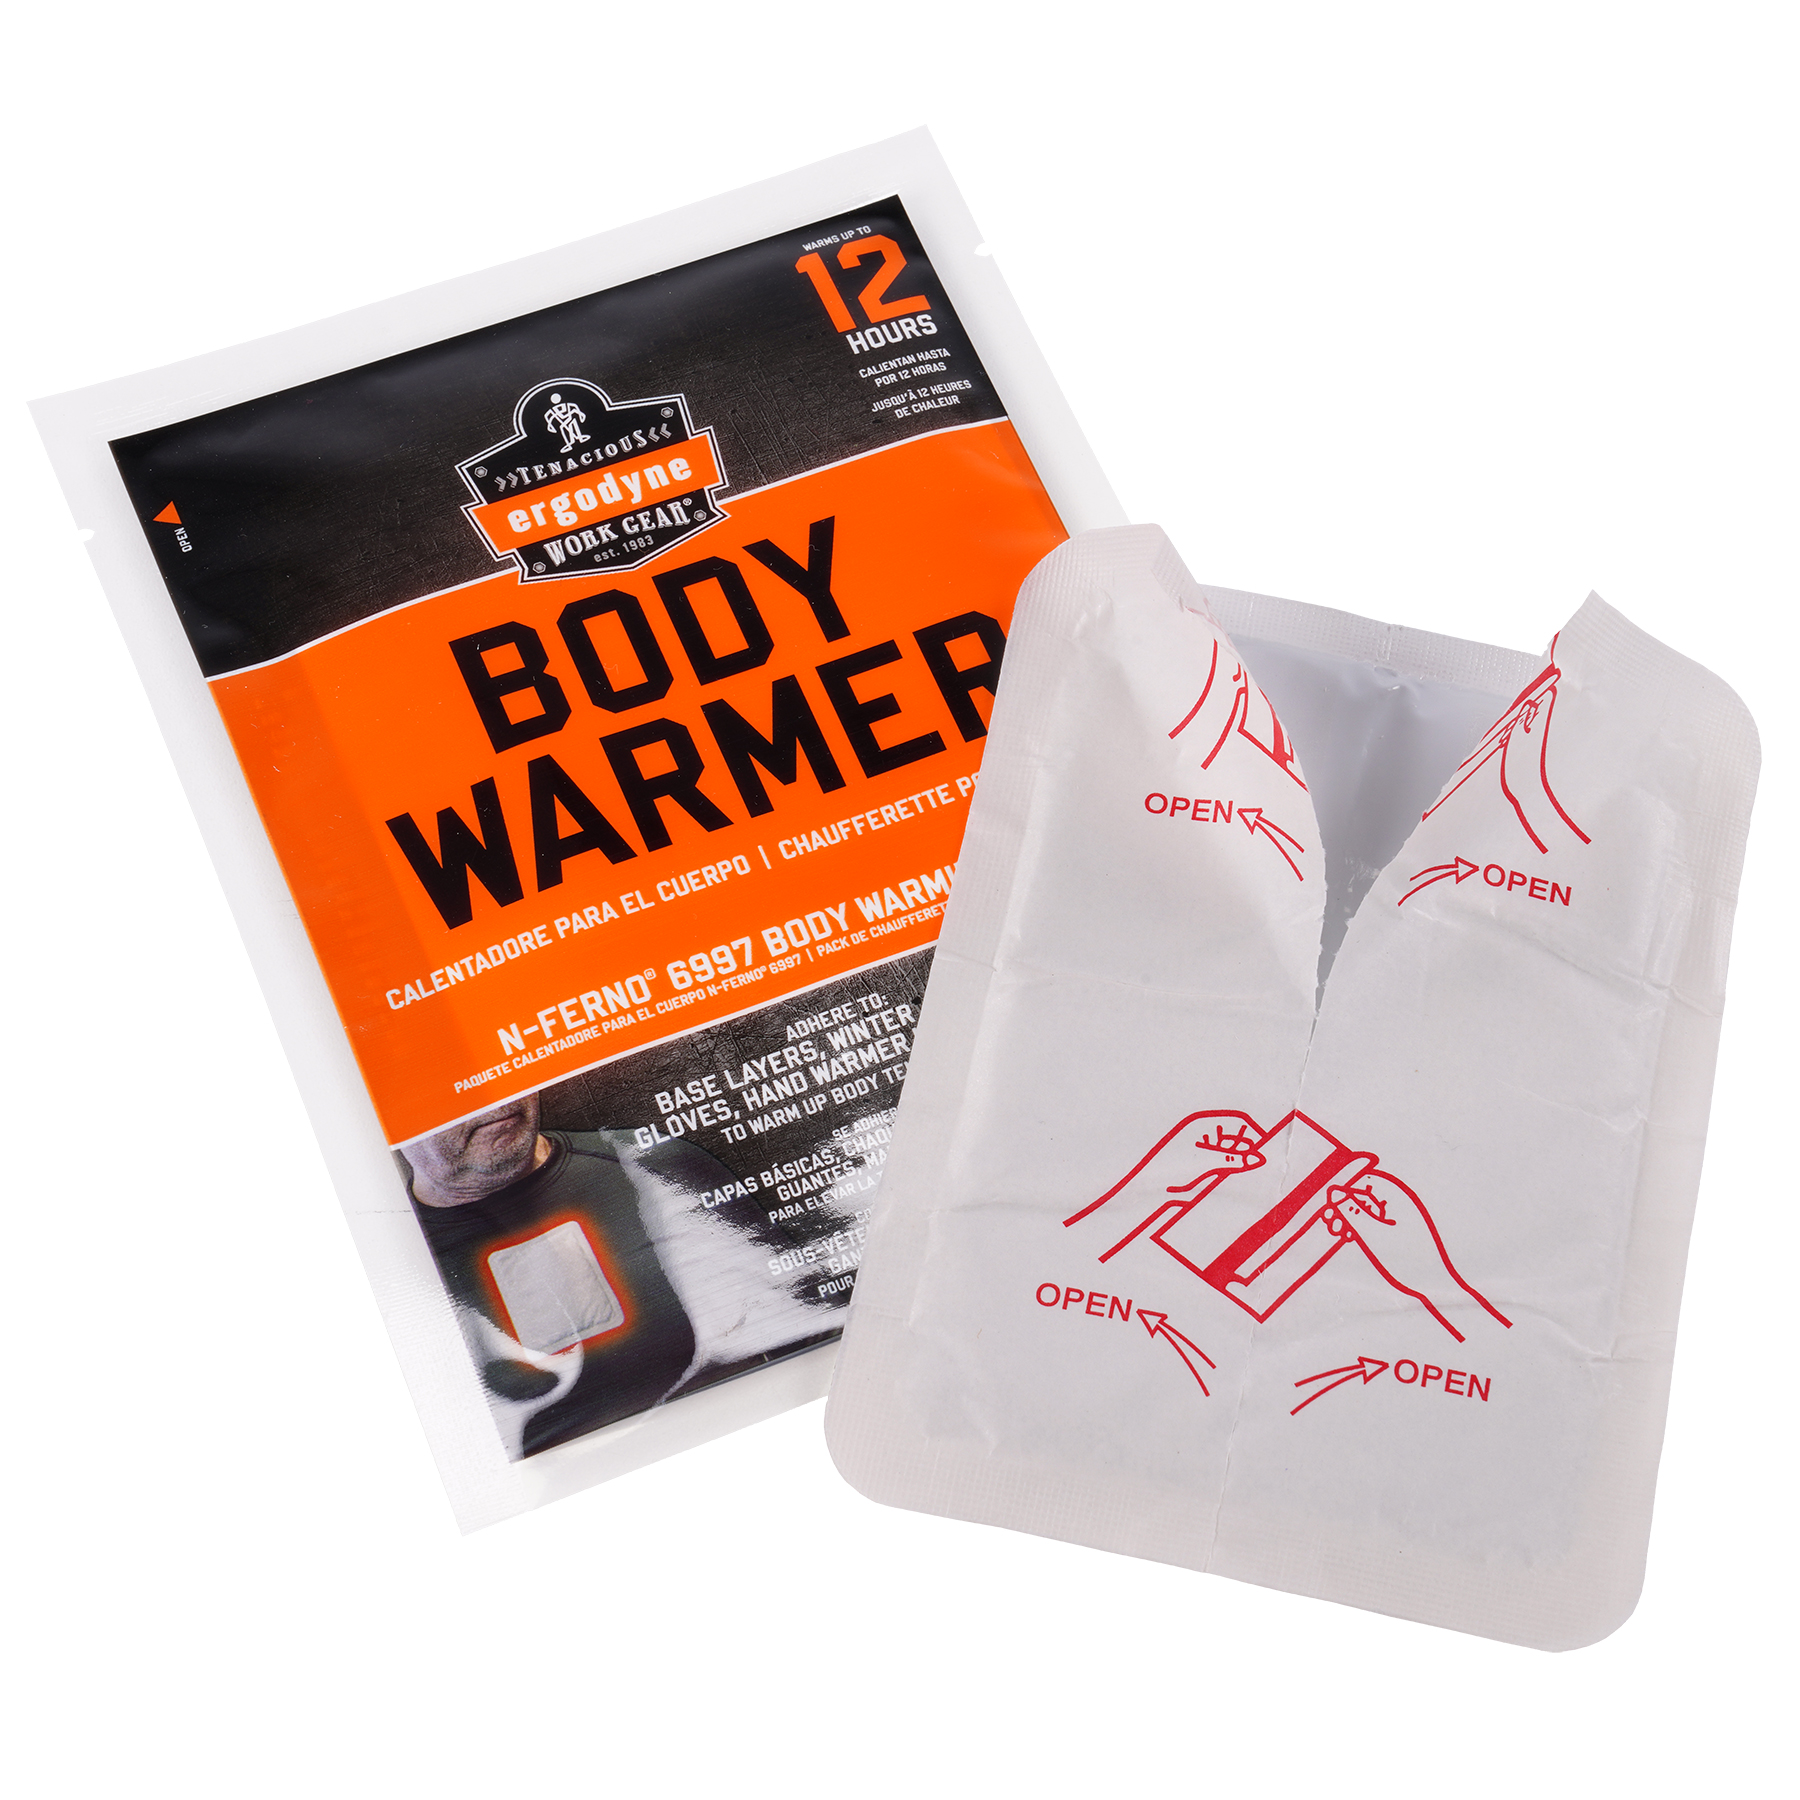 https://www.ergodyne.com/sites/default/files/product-images/16997-6997-adhesive-body-warmers-package.jpg